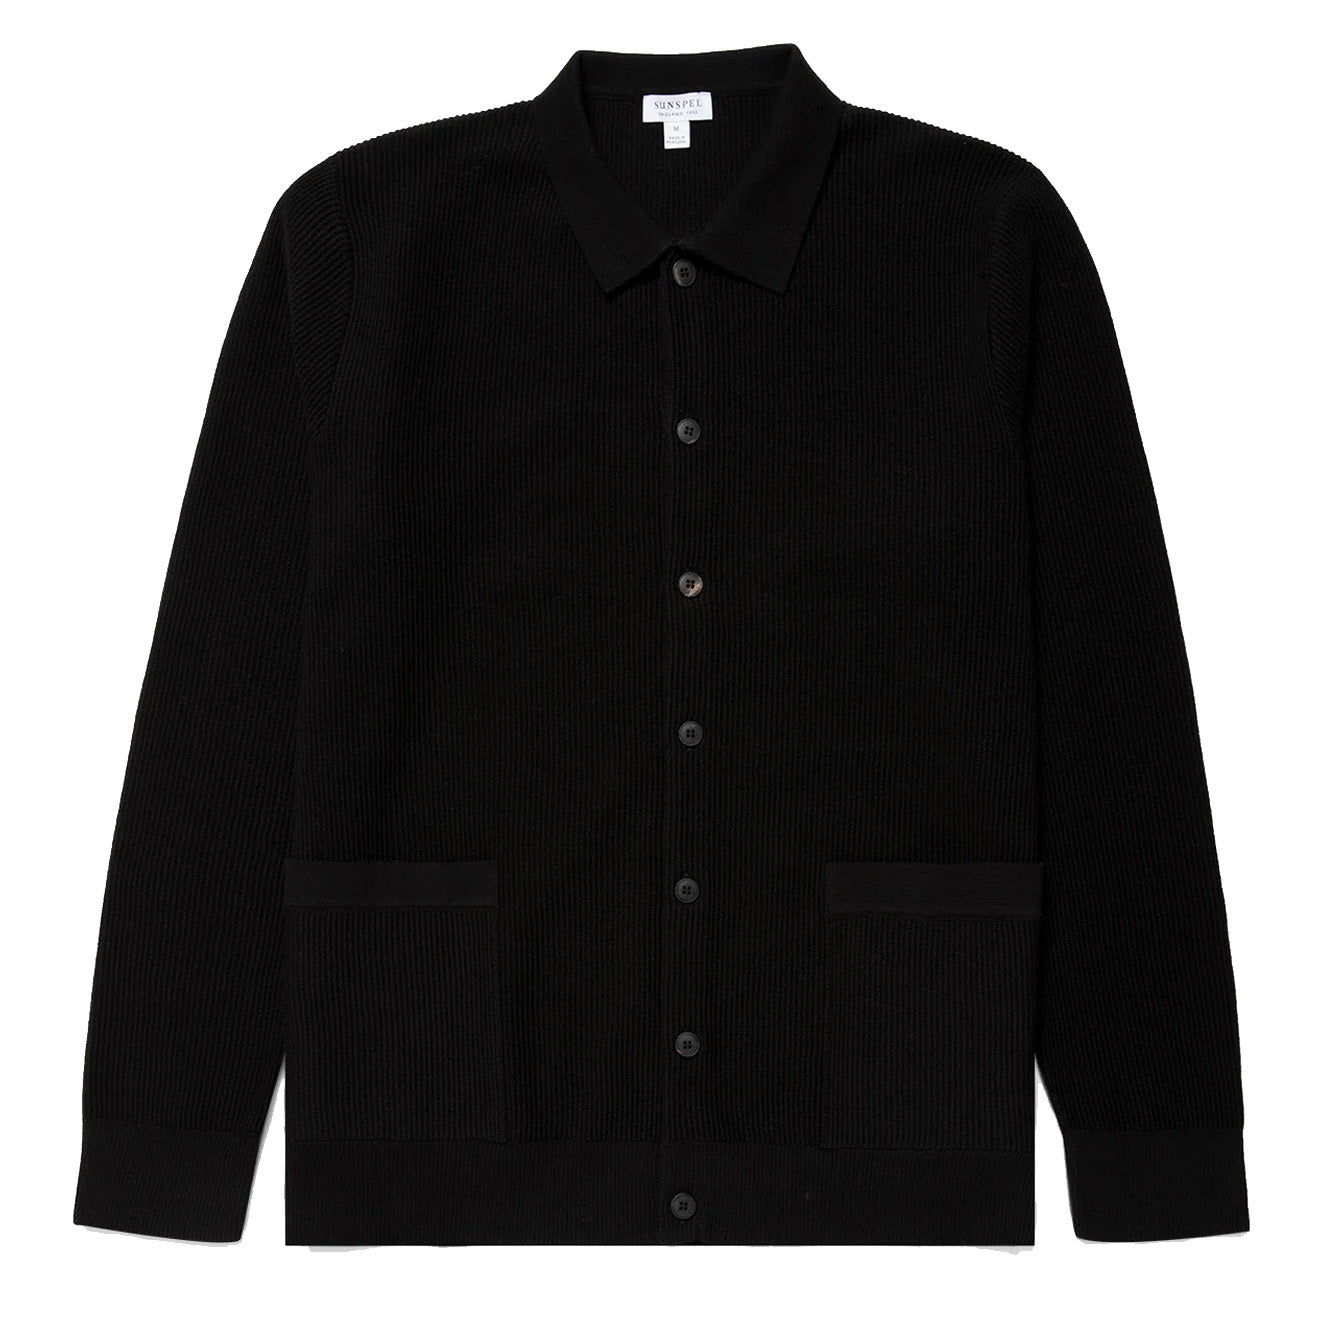 Sunspel Knitted Jacket Black | The Sporting Lodge